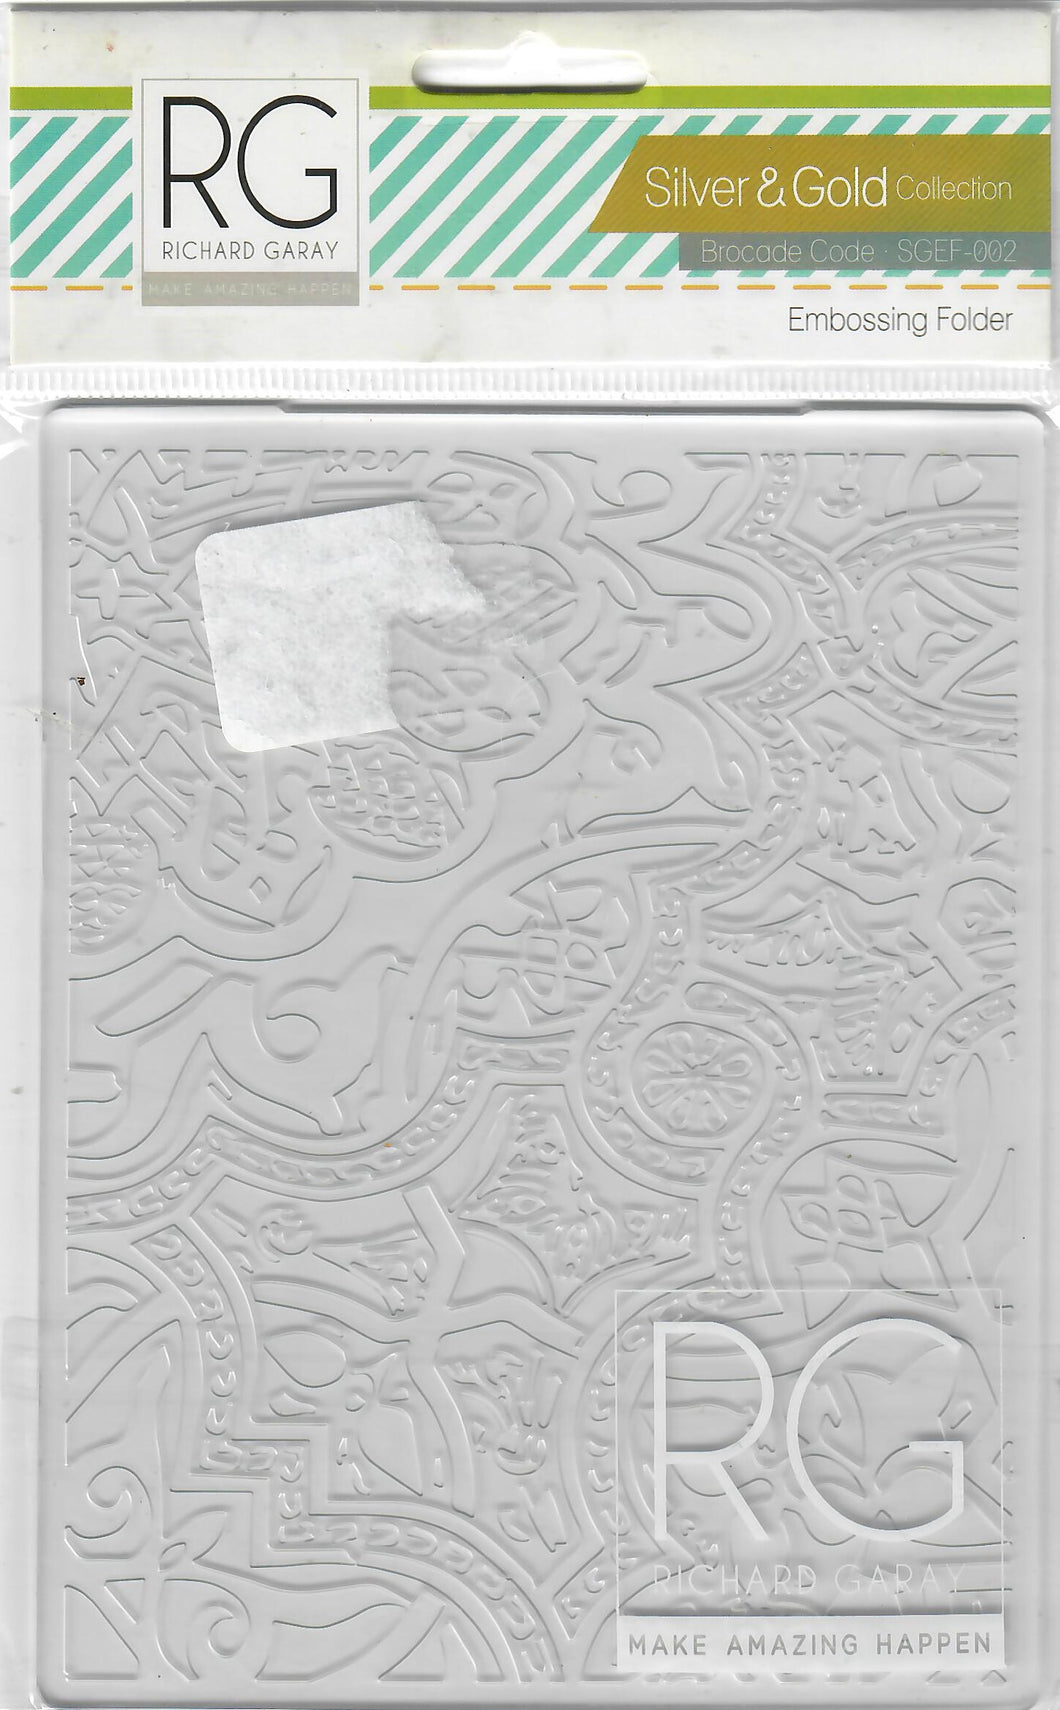 Richard Garay embossing folder A2 - Silver and gold collection  - Brocade code